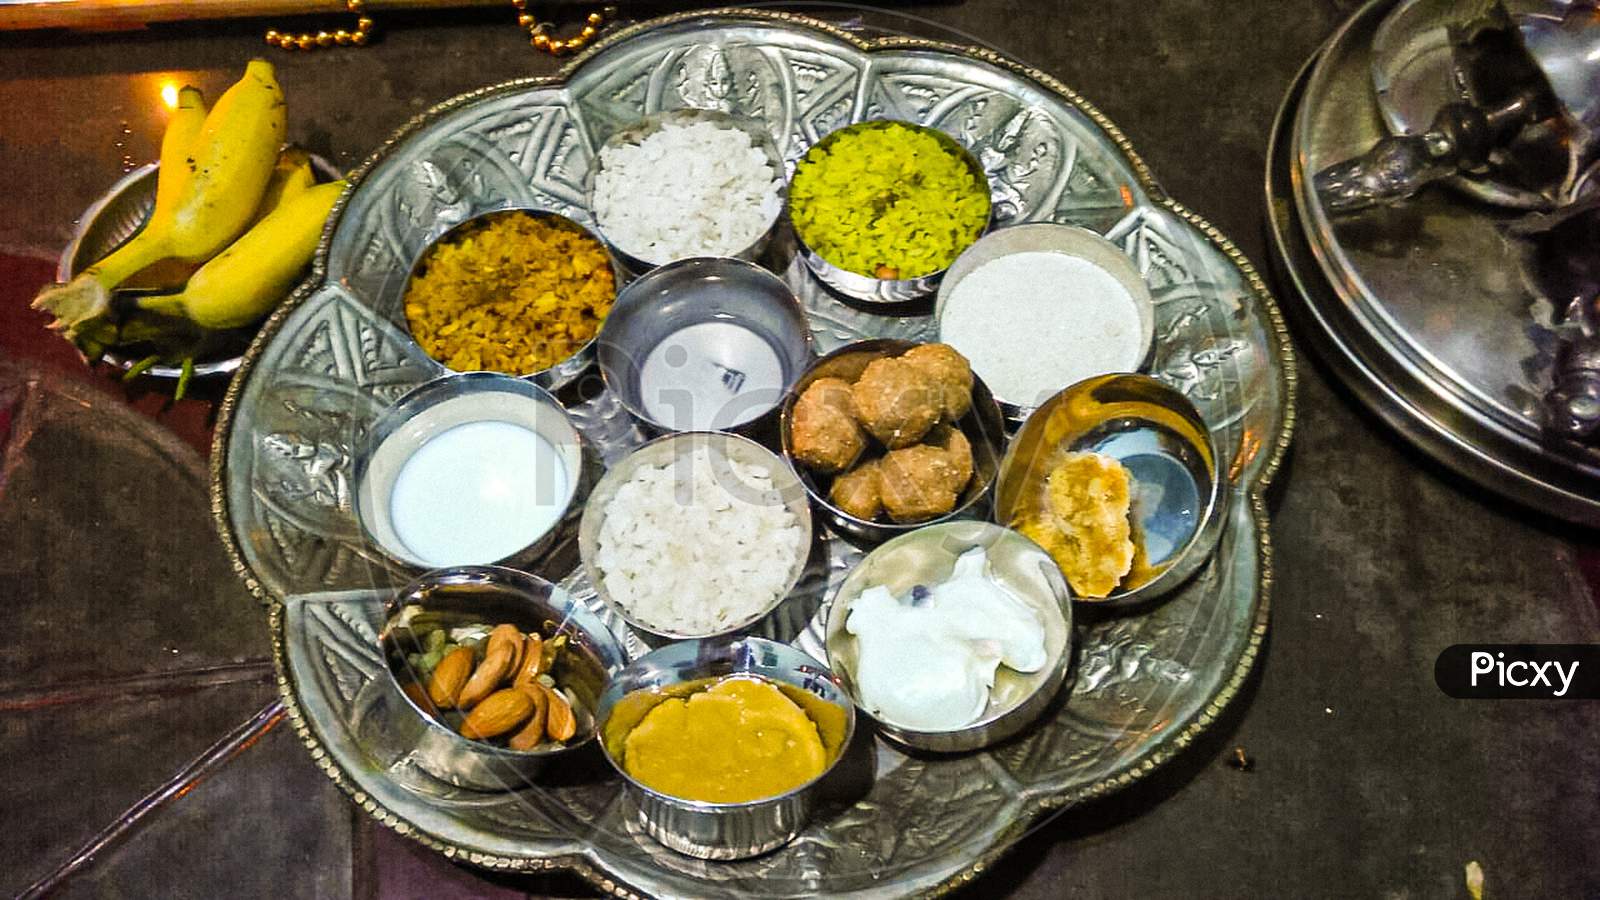 Silver plater offerings for God on the occasion of Krishna Janmashtami